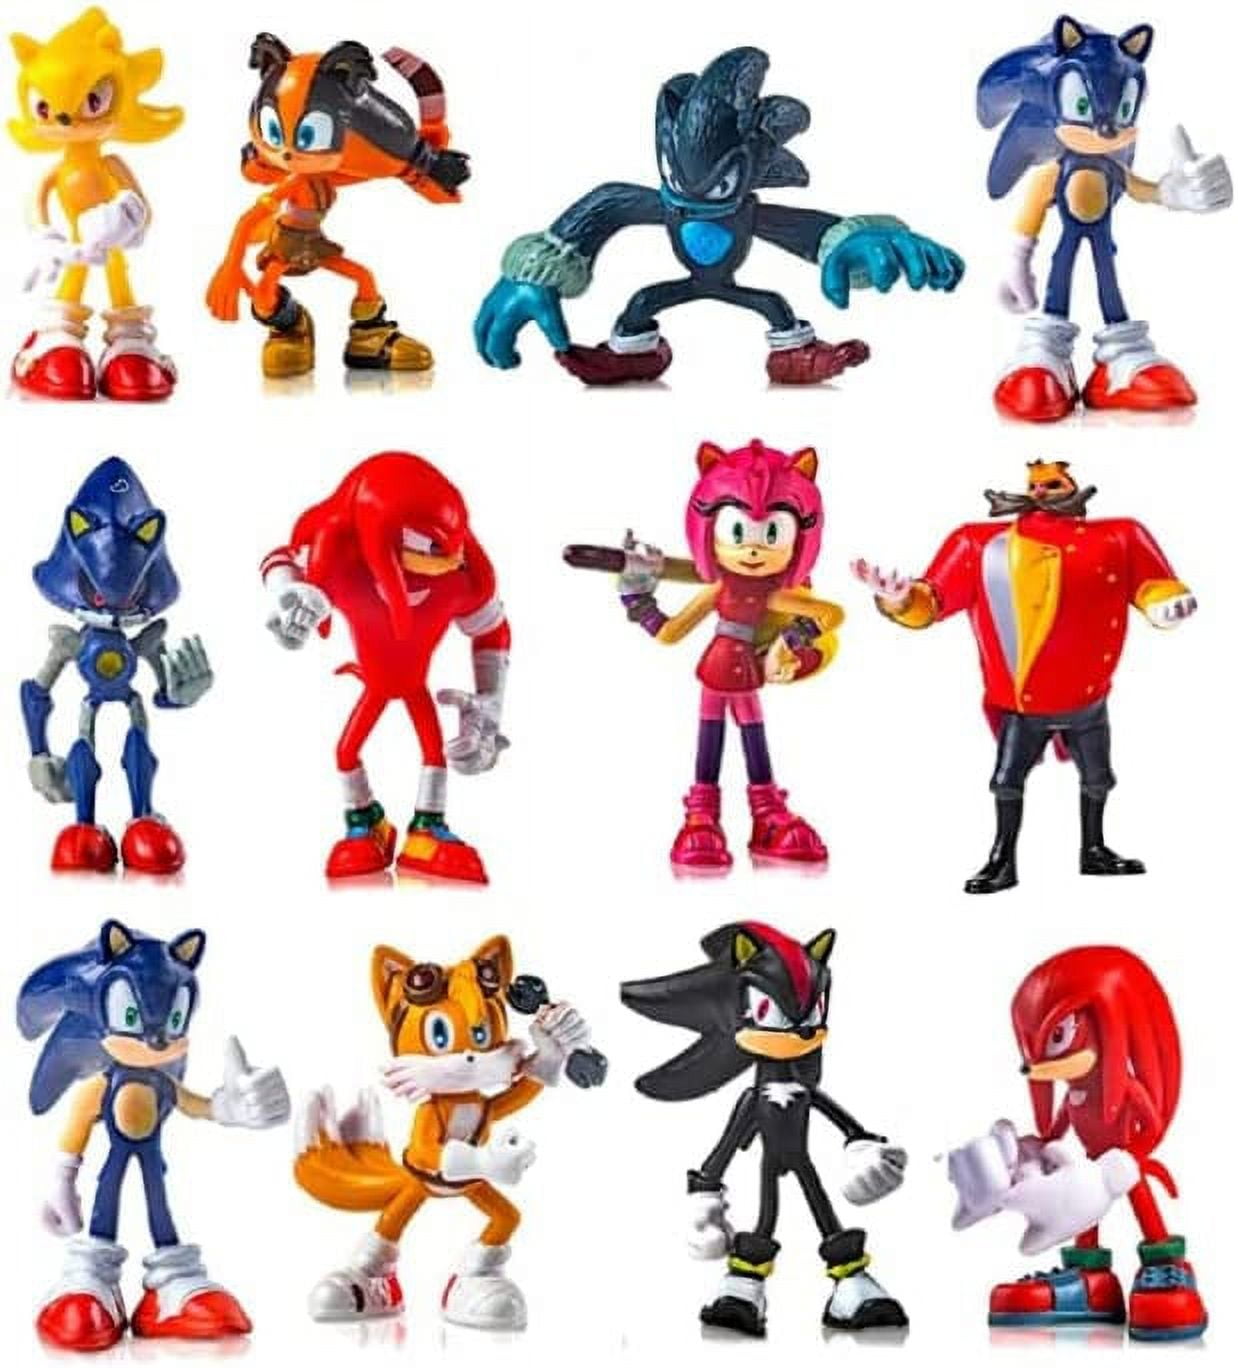 12 Pack Mini Sonic Hedgehog Action Figures ，Sonic Toy, 1.57-2.17'' Tall  Sonic Hedgehog Toys，Perfect Kids Gifts.